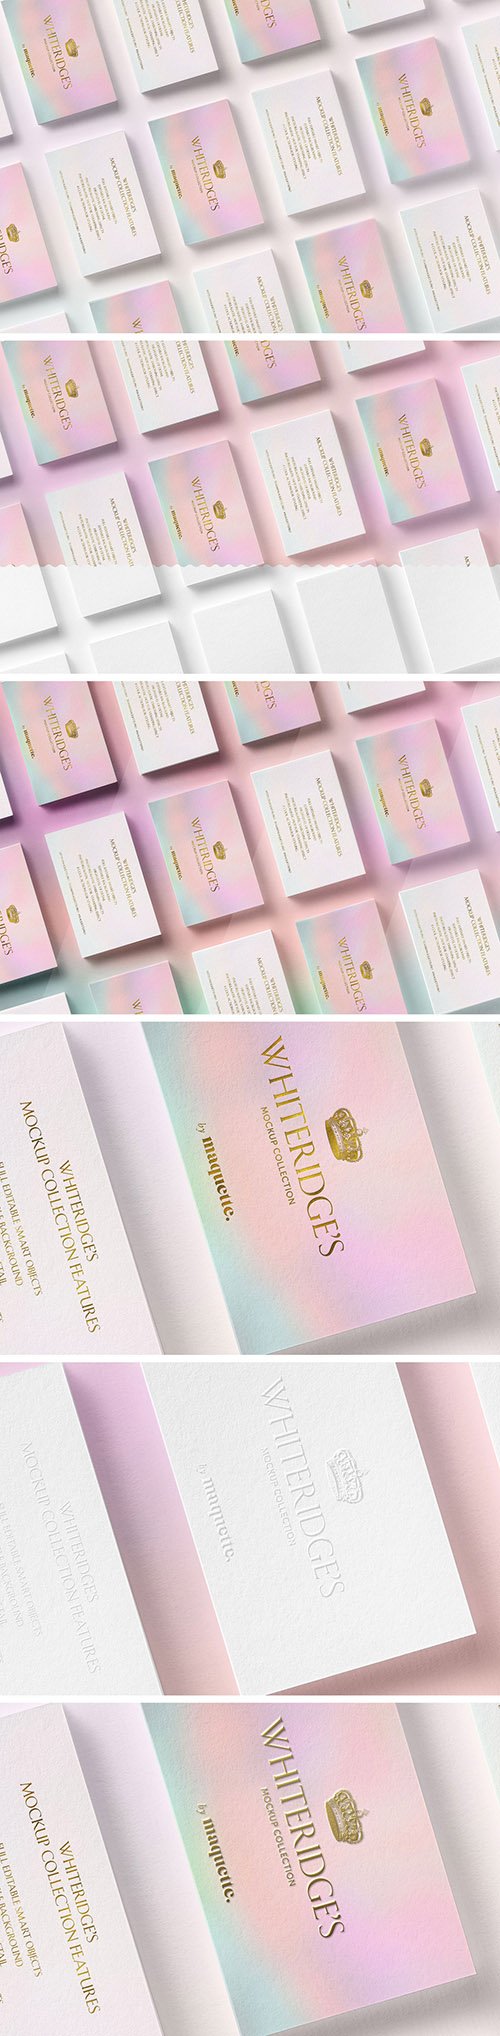 Array of Luxury Gold-Embossed Business Cards Mockup 2